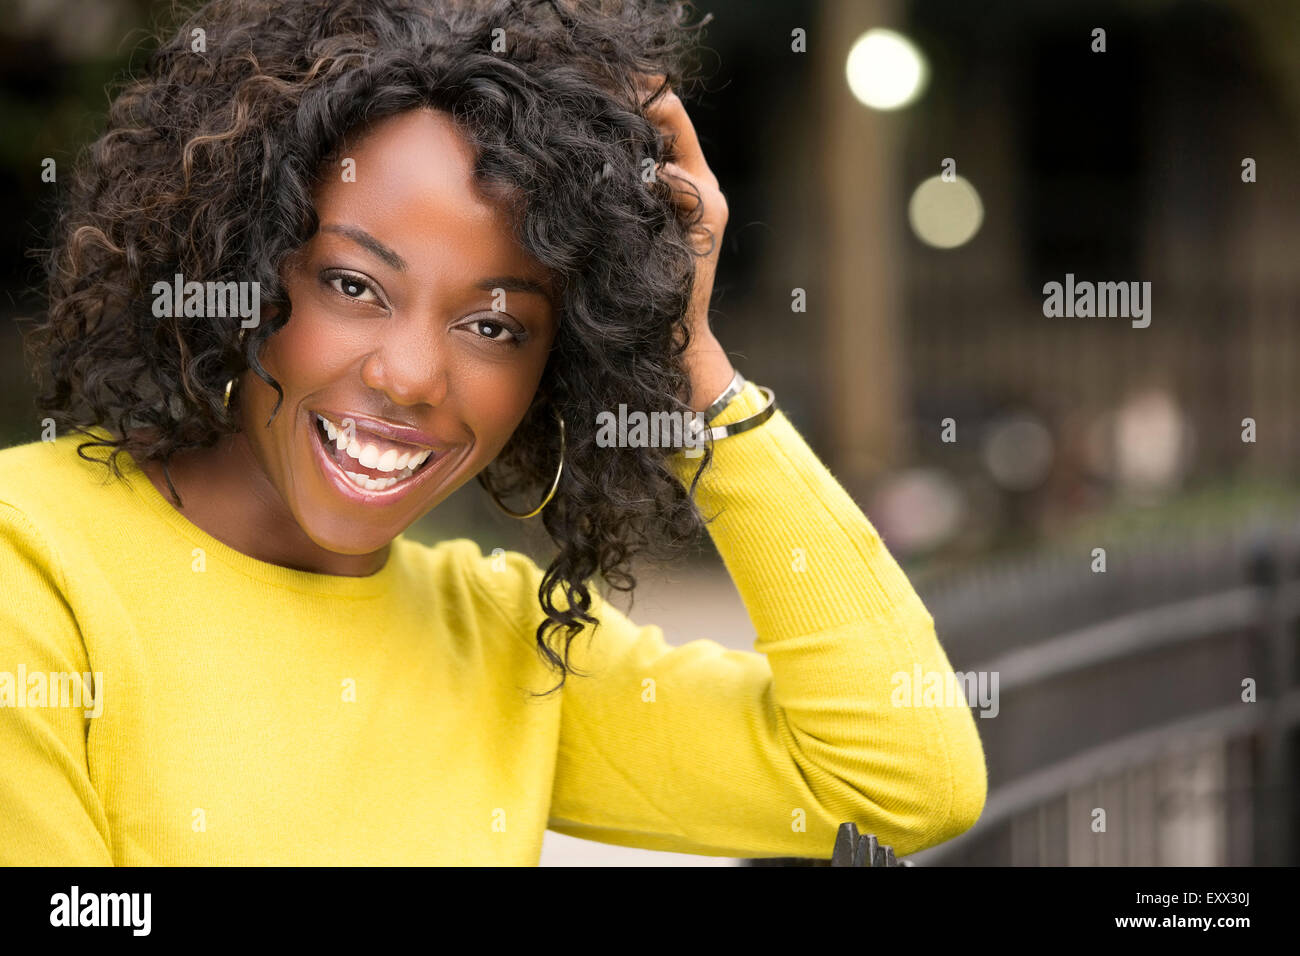 Smiling woman with hand in hair Stock Photo